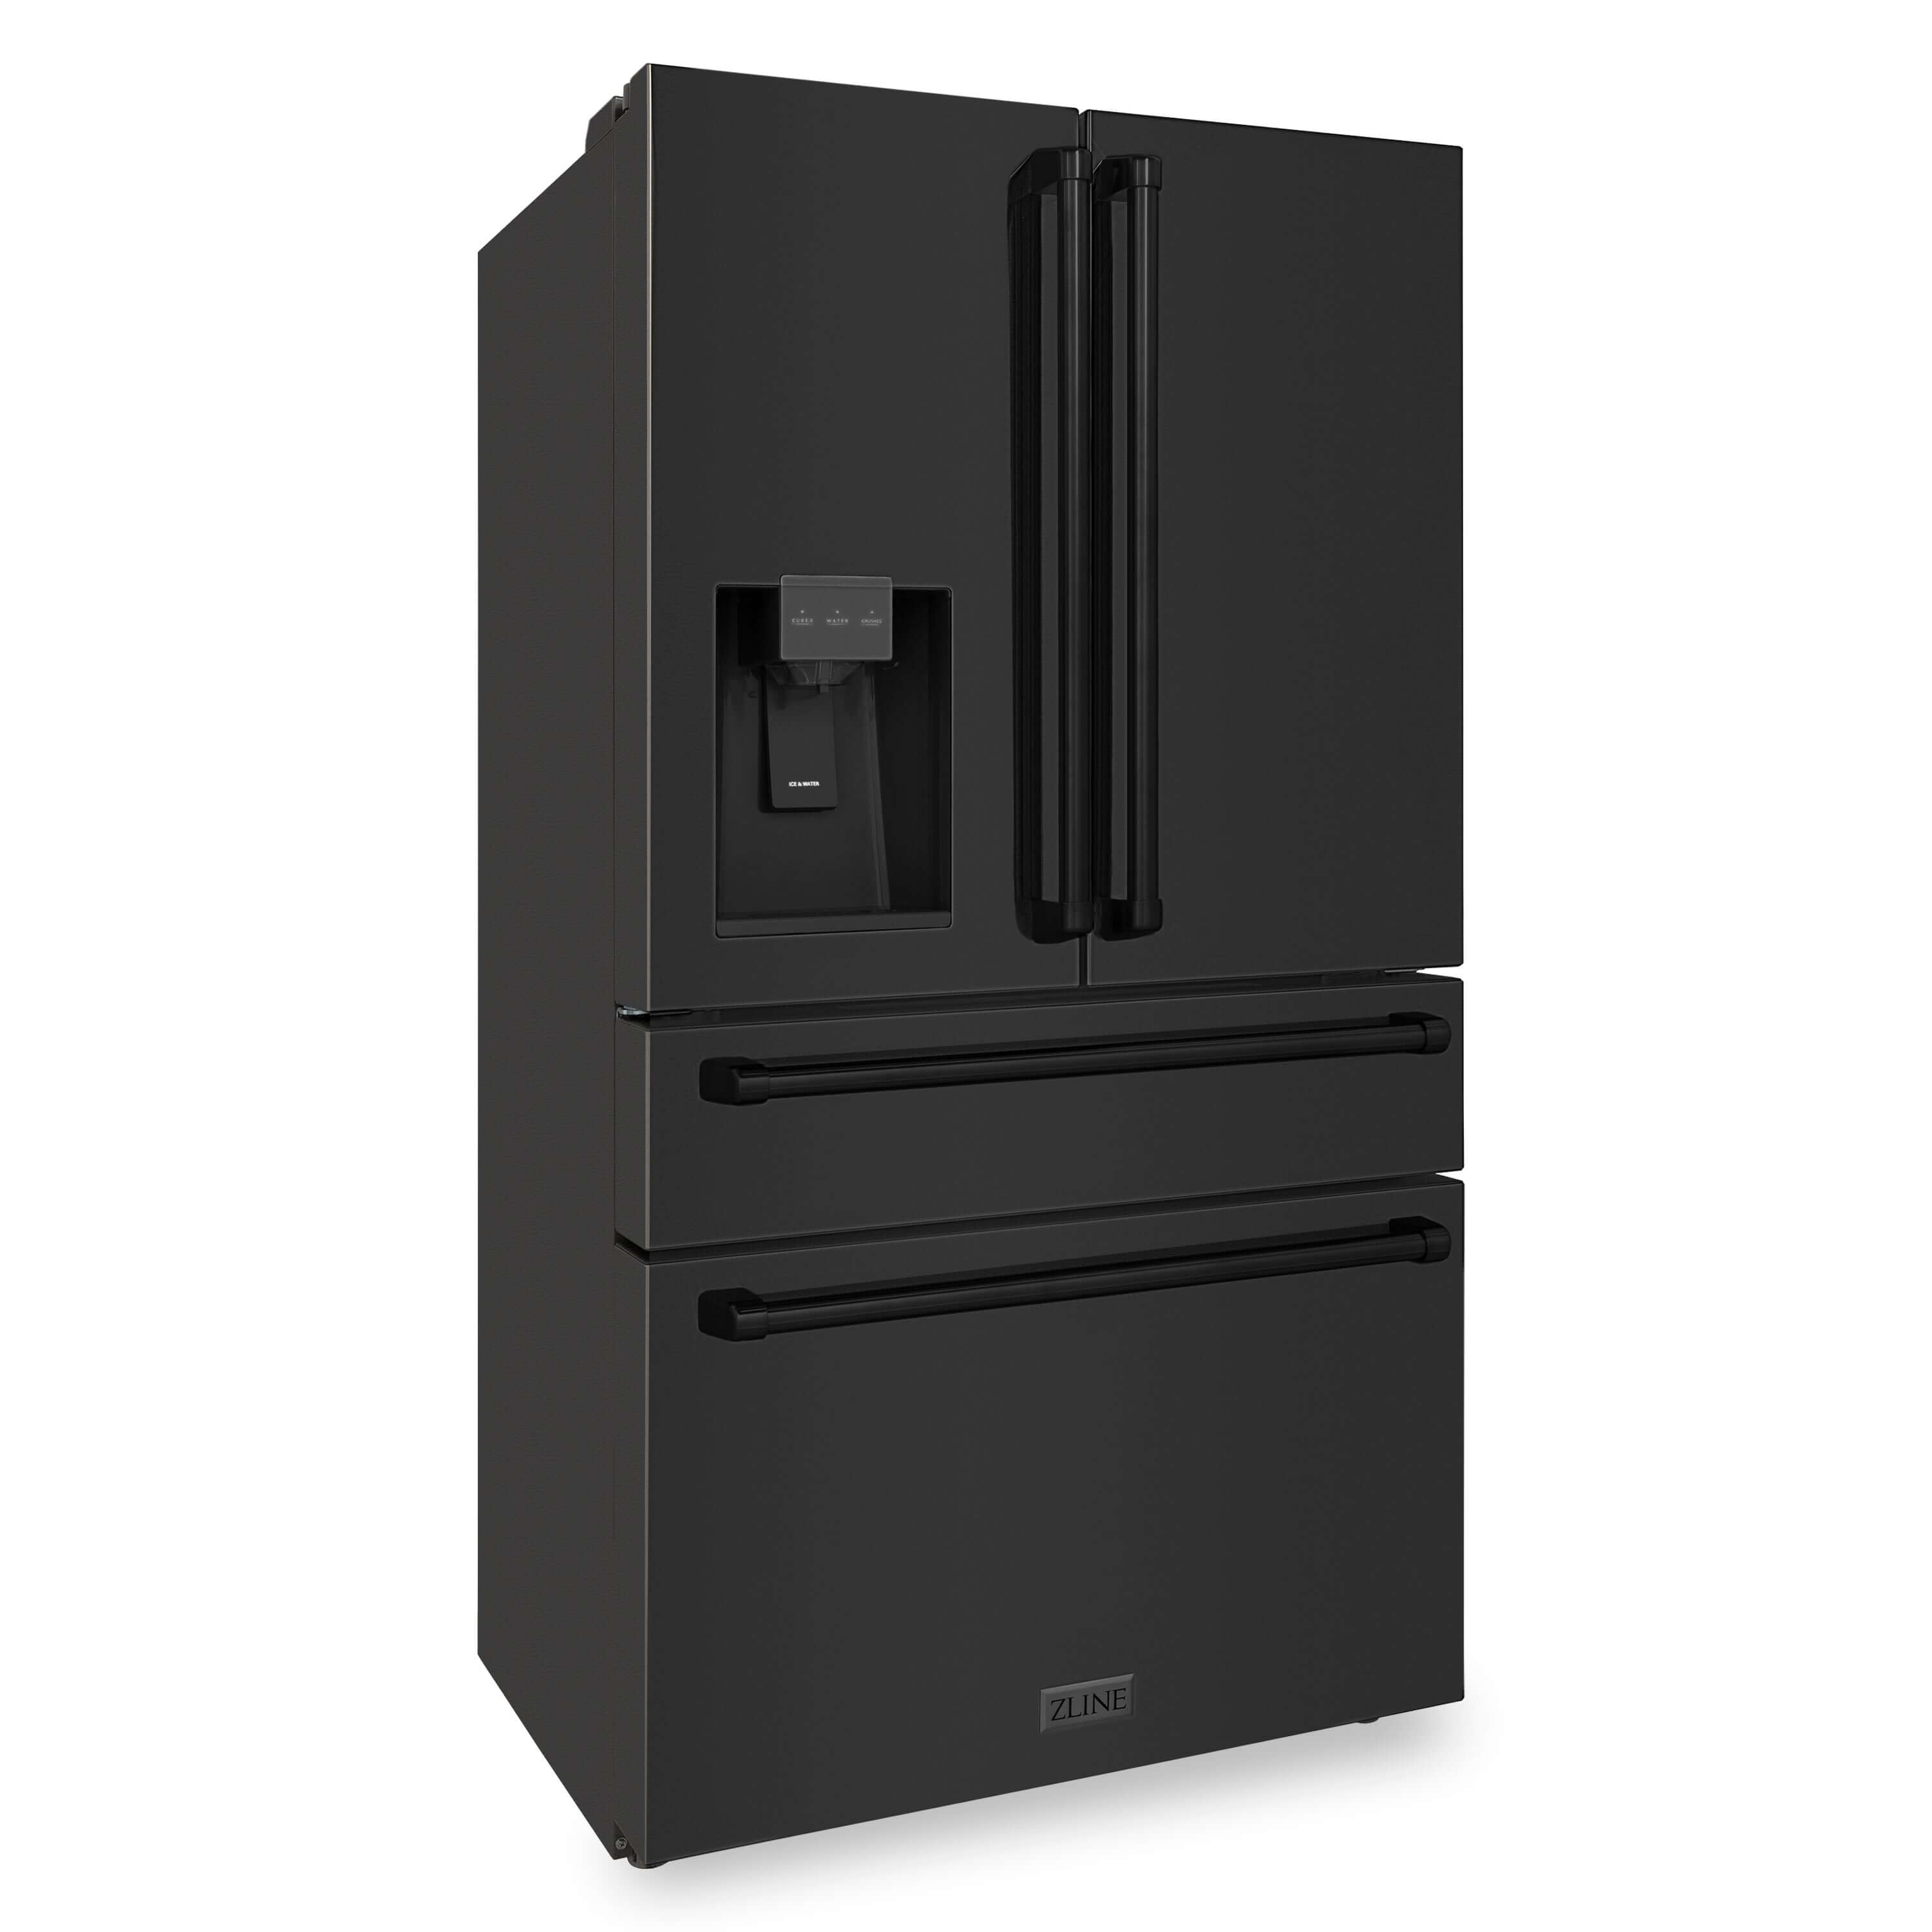 ZLINE 36 in. Black Stainless Steel French Door Refrigerator with External Water and Ice Dispenser Side View.